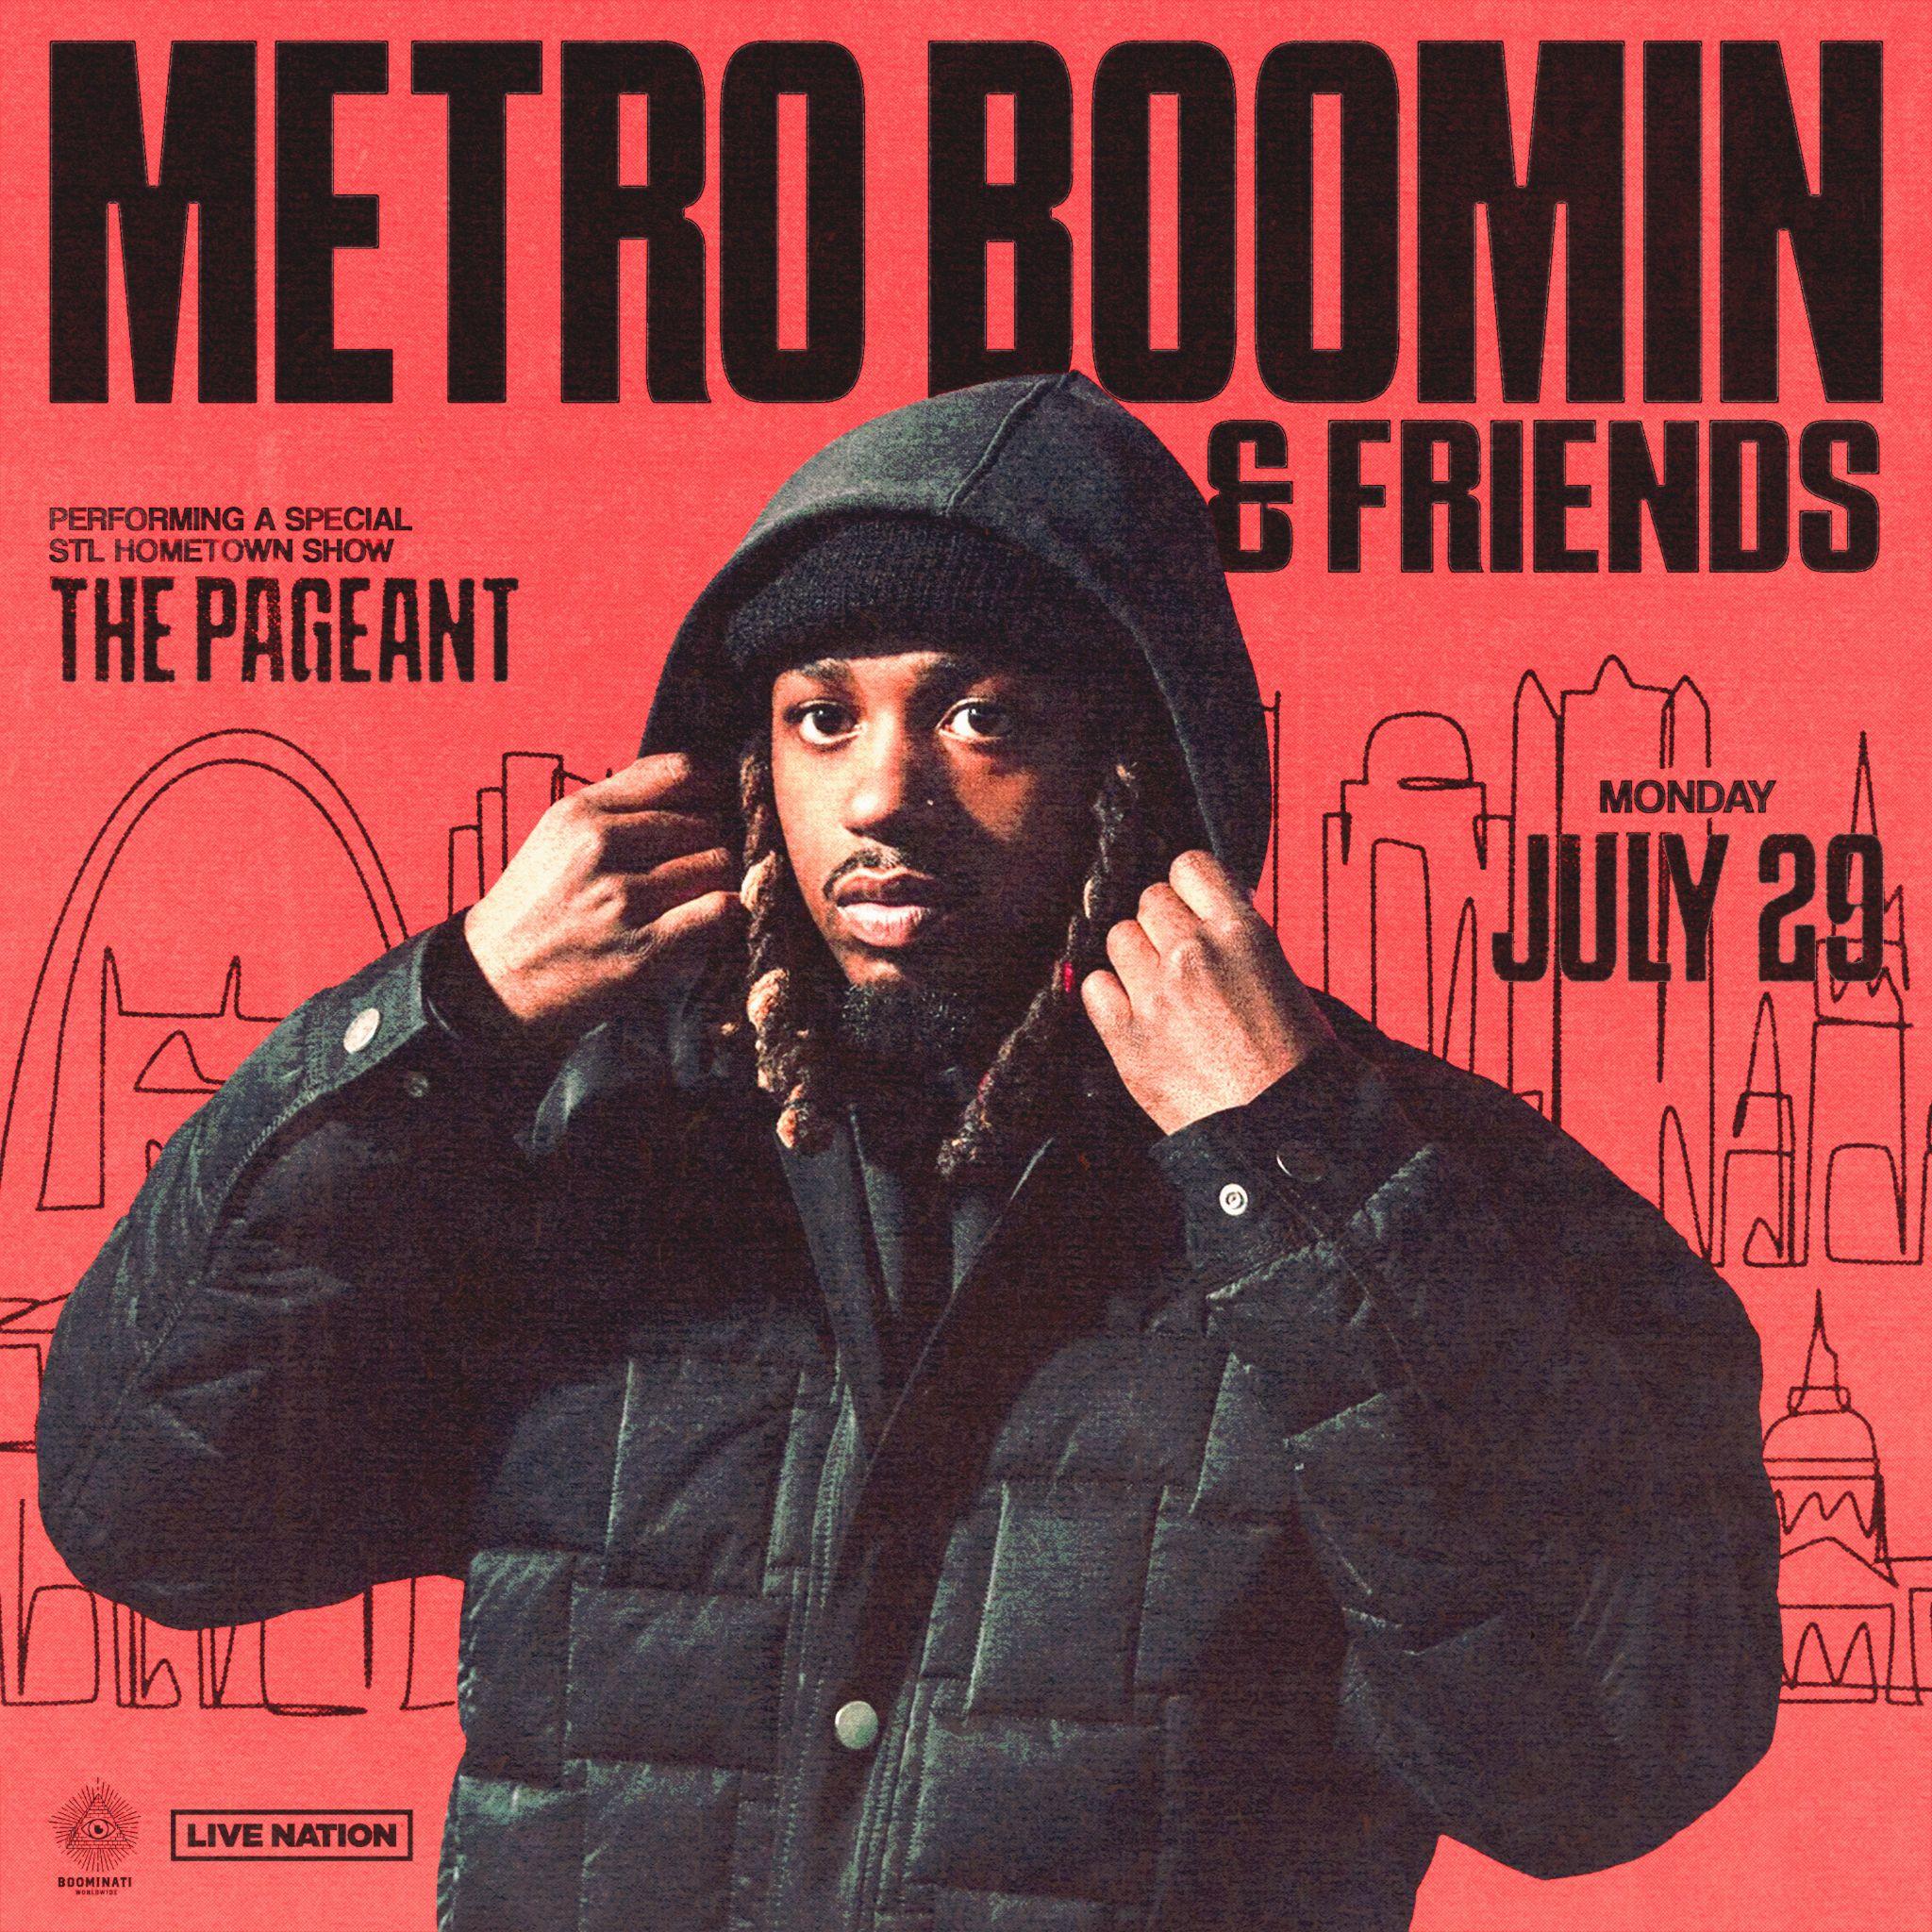 Metro Boomin Announces Special Hometown Performance in St. Louis